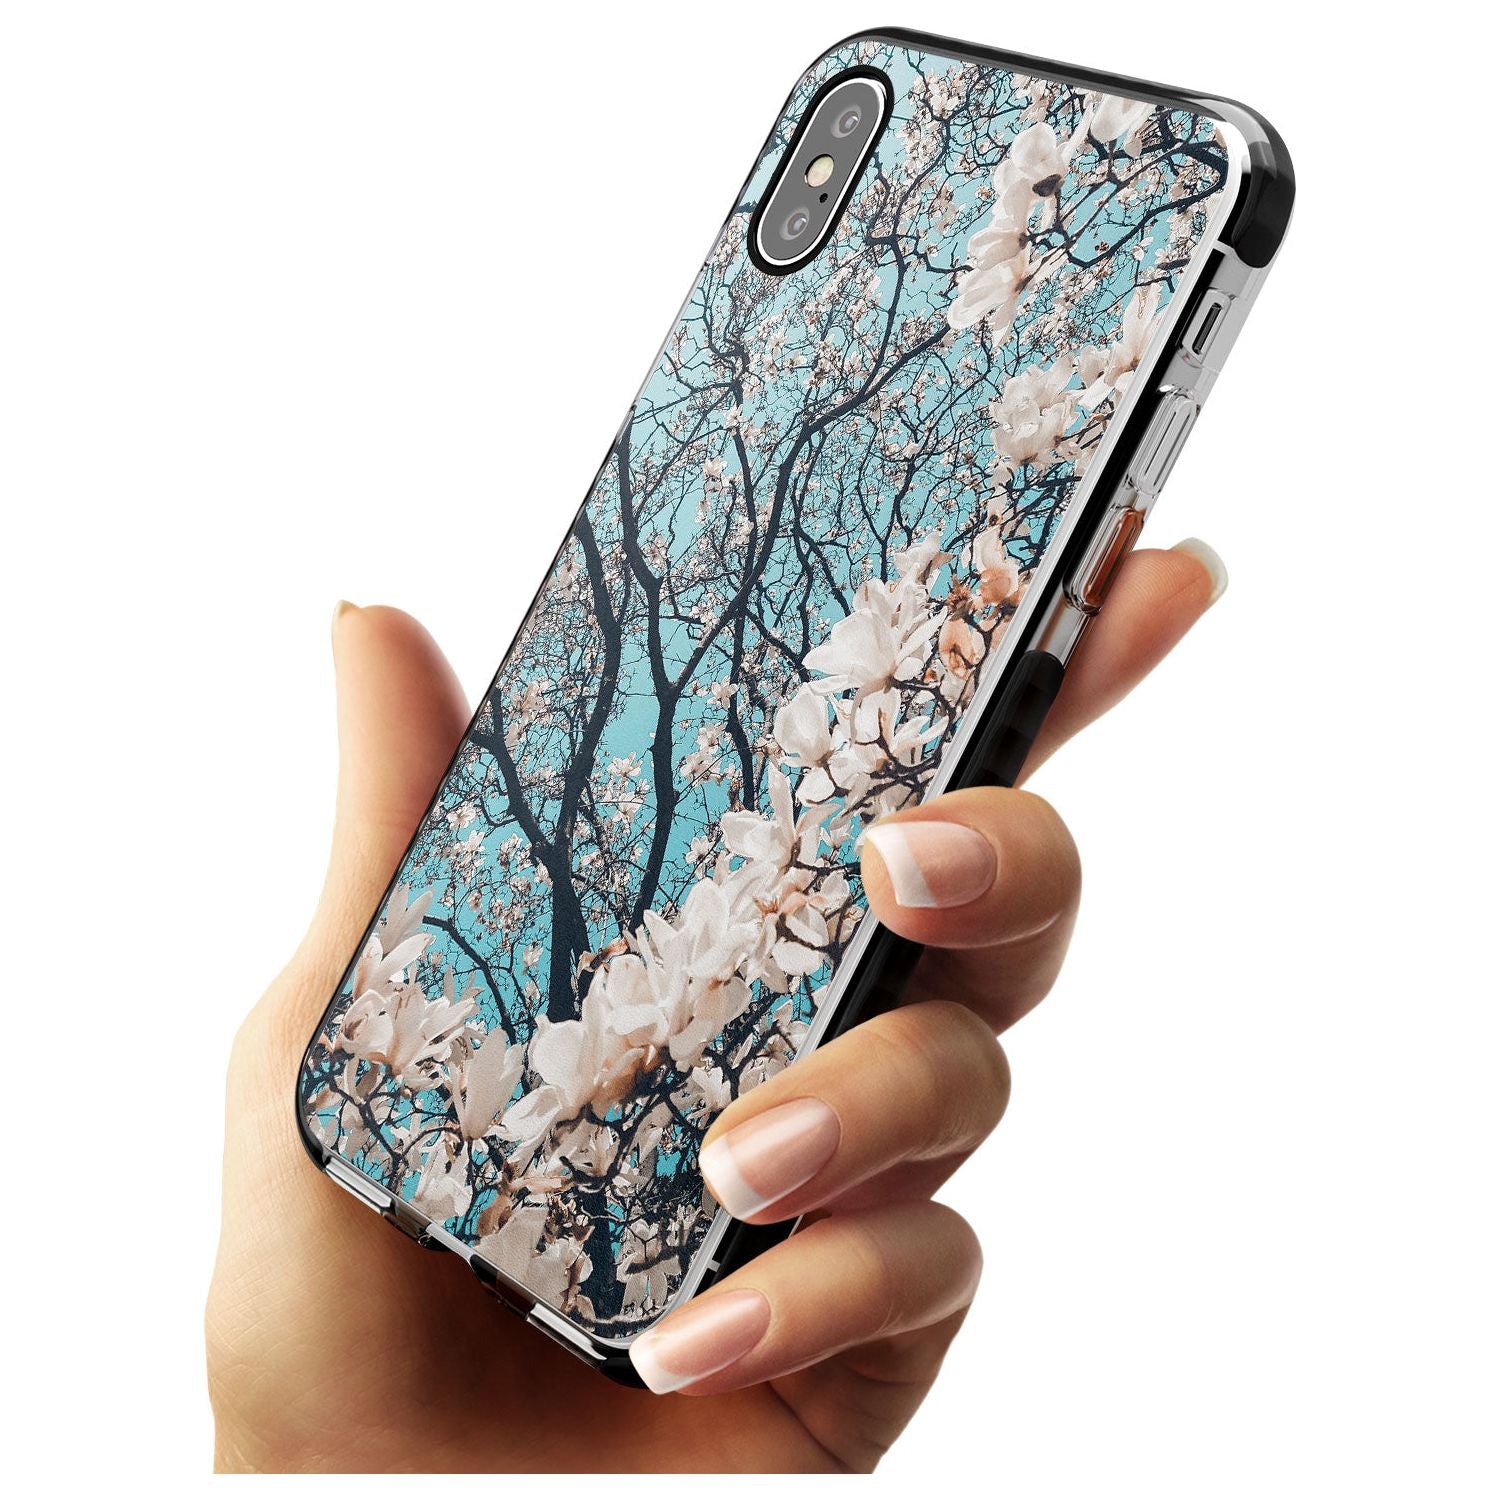 Magnolia Tree Photograph Black Impact Phone Case for iPhone X XS Max XR